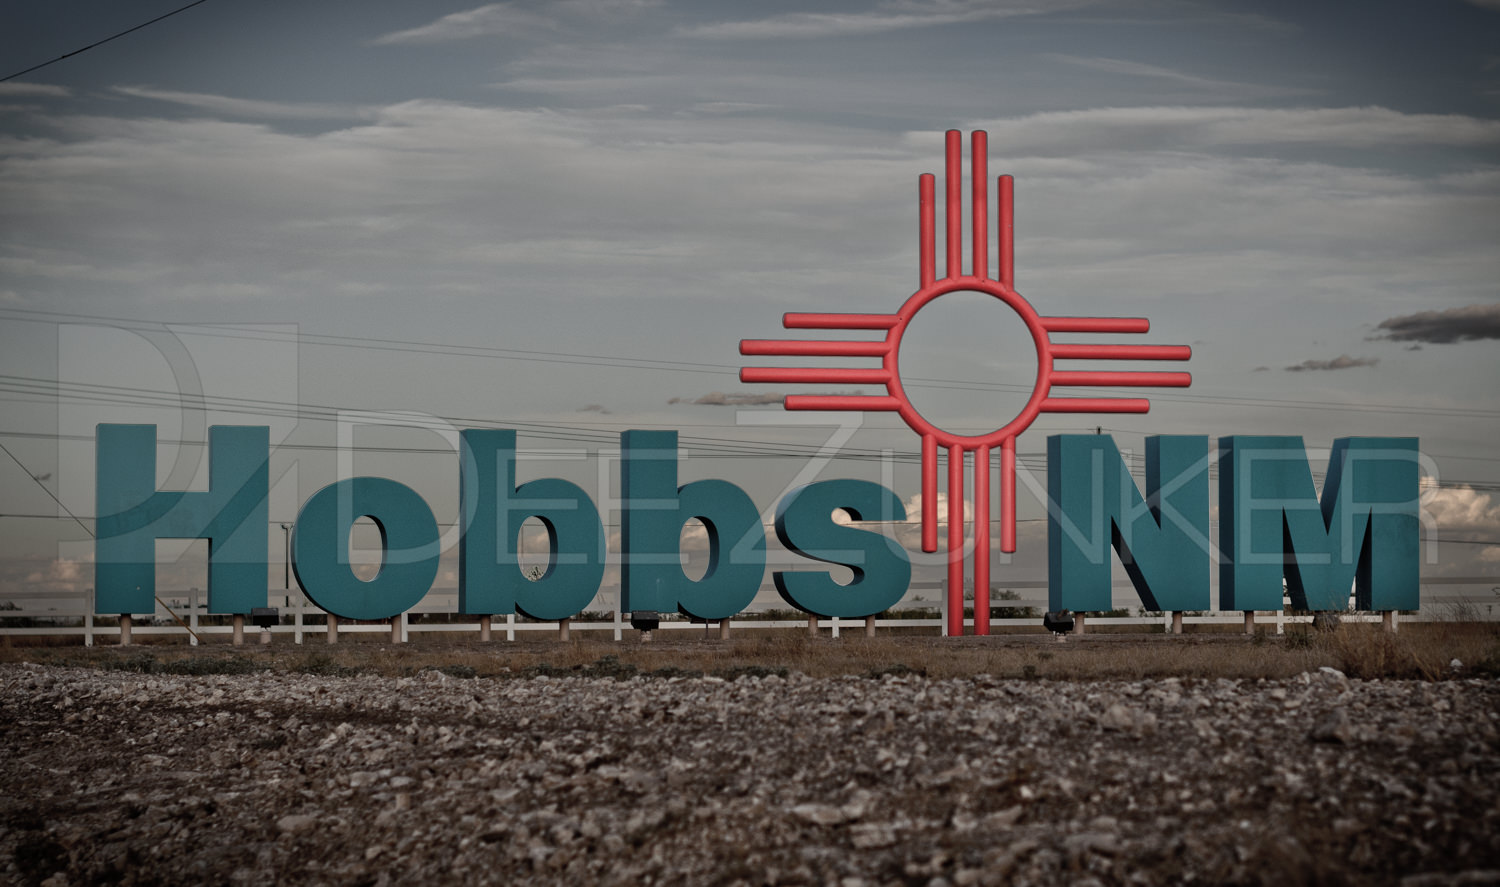 Hobbs NM City Sign Houston Commercial Architectural Photographer Dee Zunker